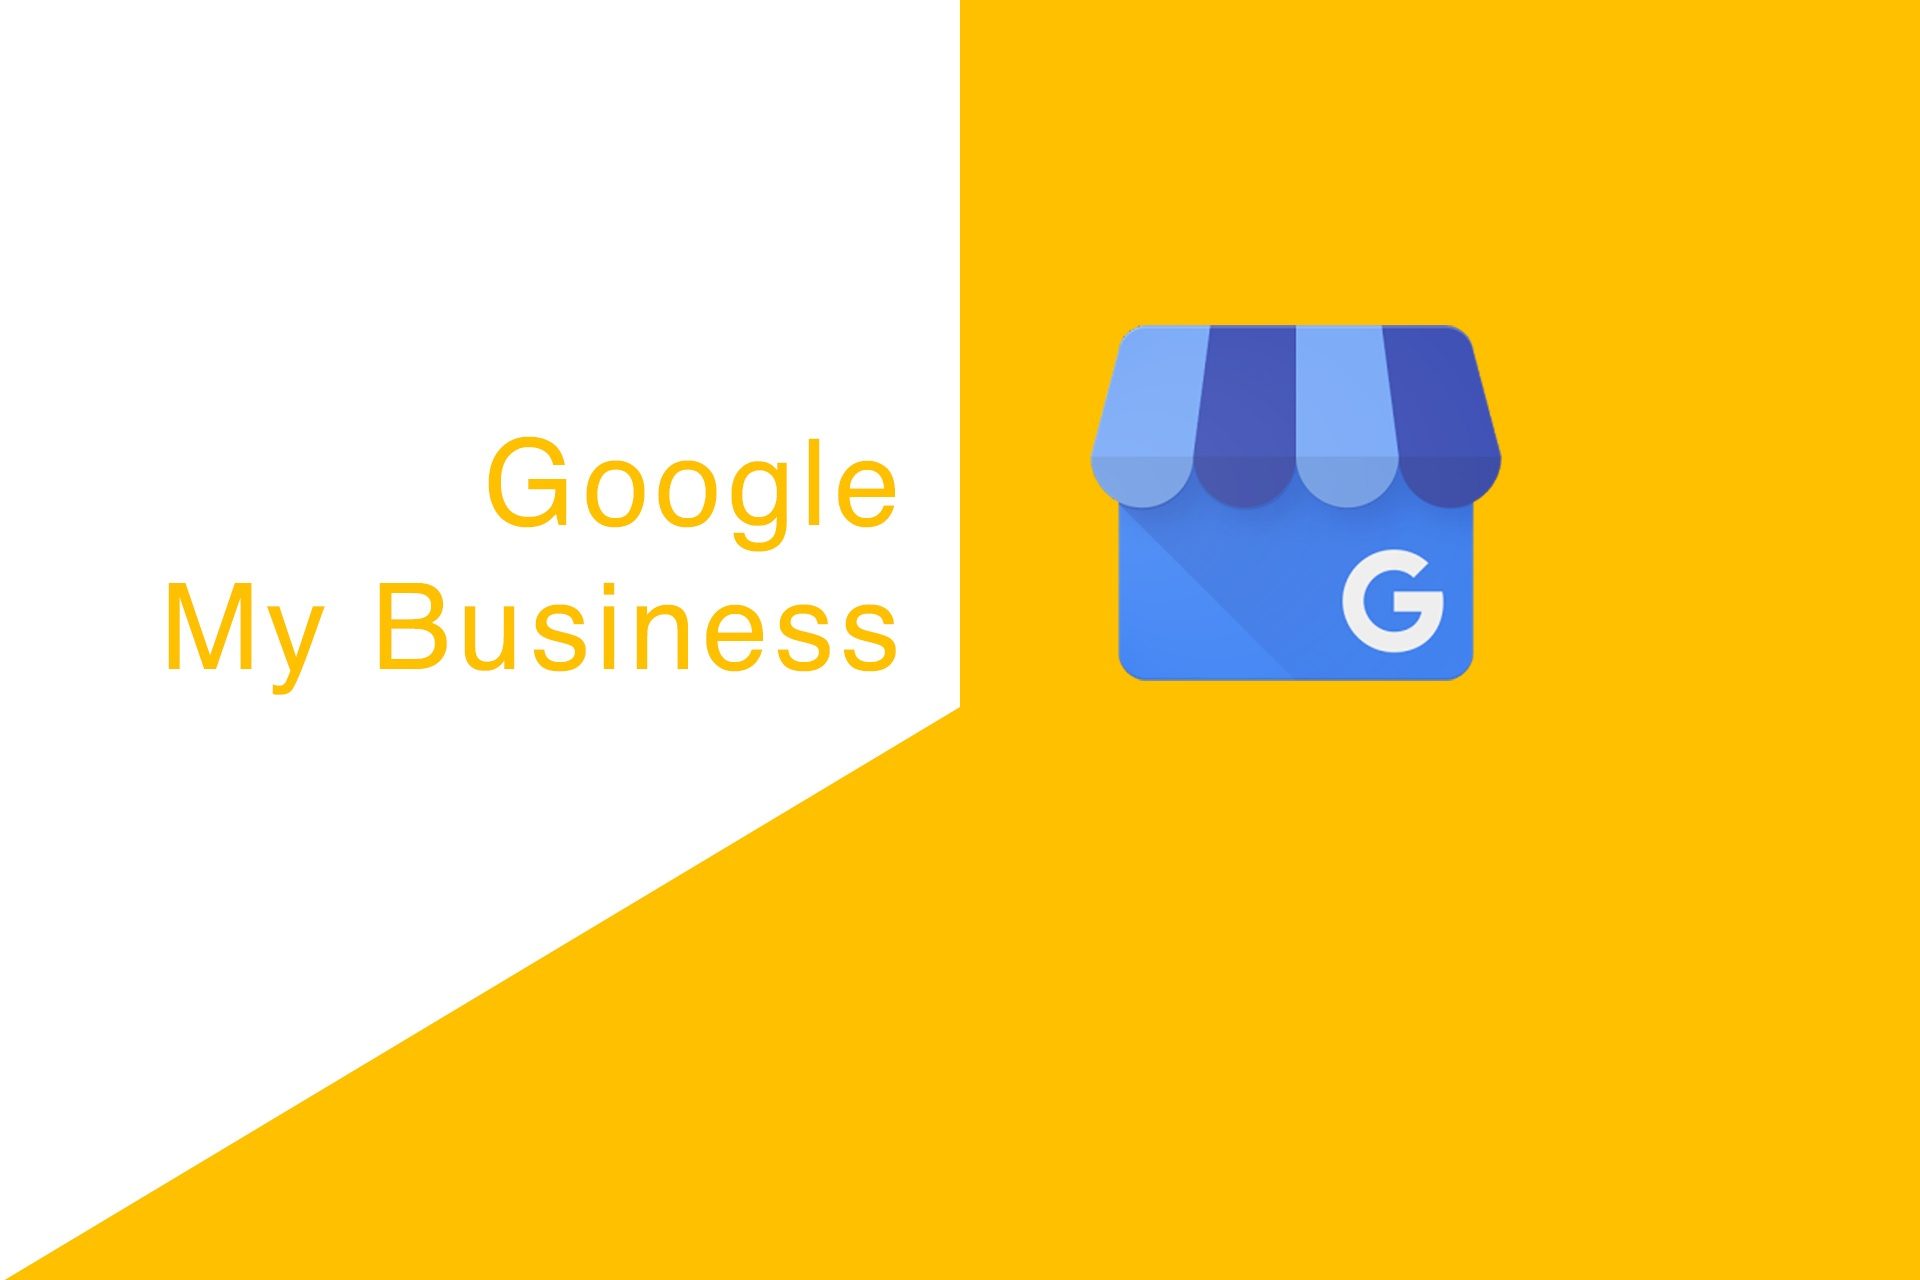 google my business app being replaced